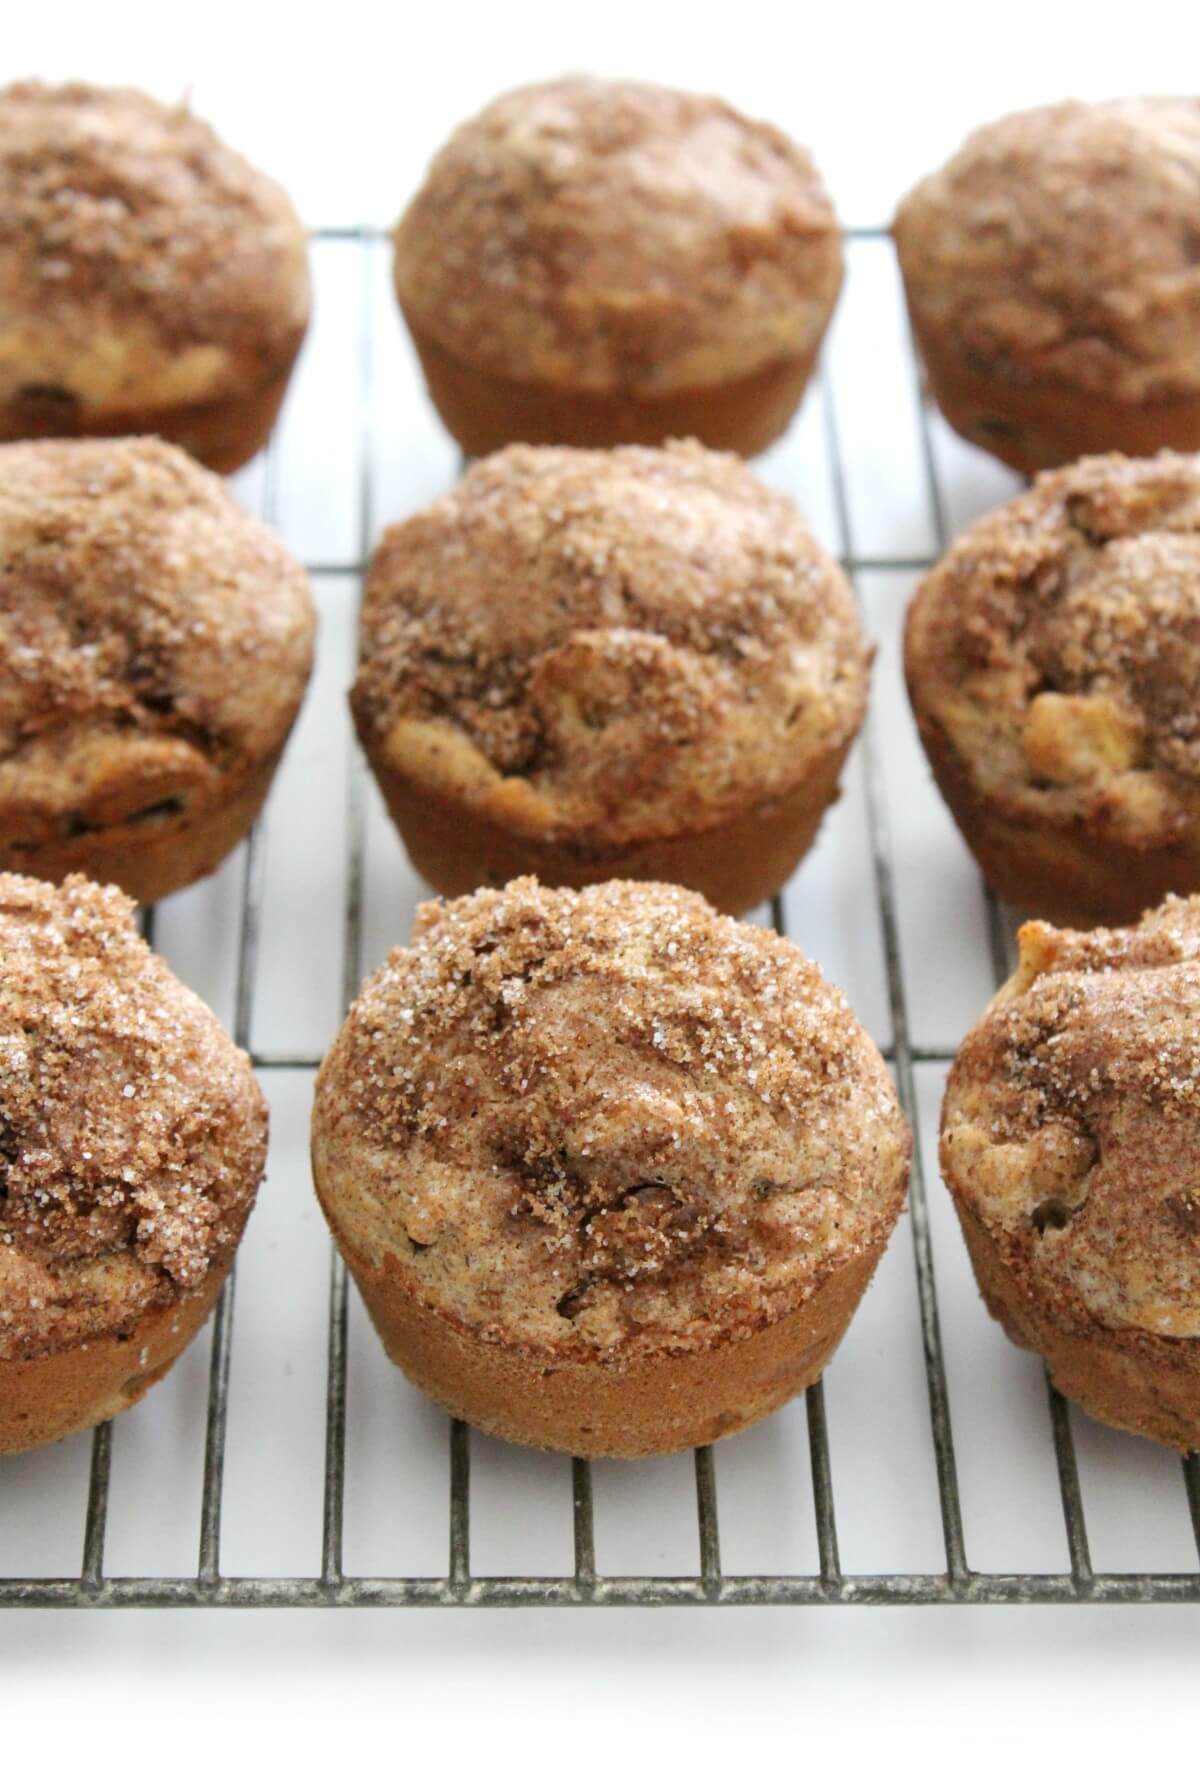 gluten-free apple cinnamon muffins cooling on a wire rack